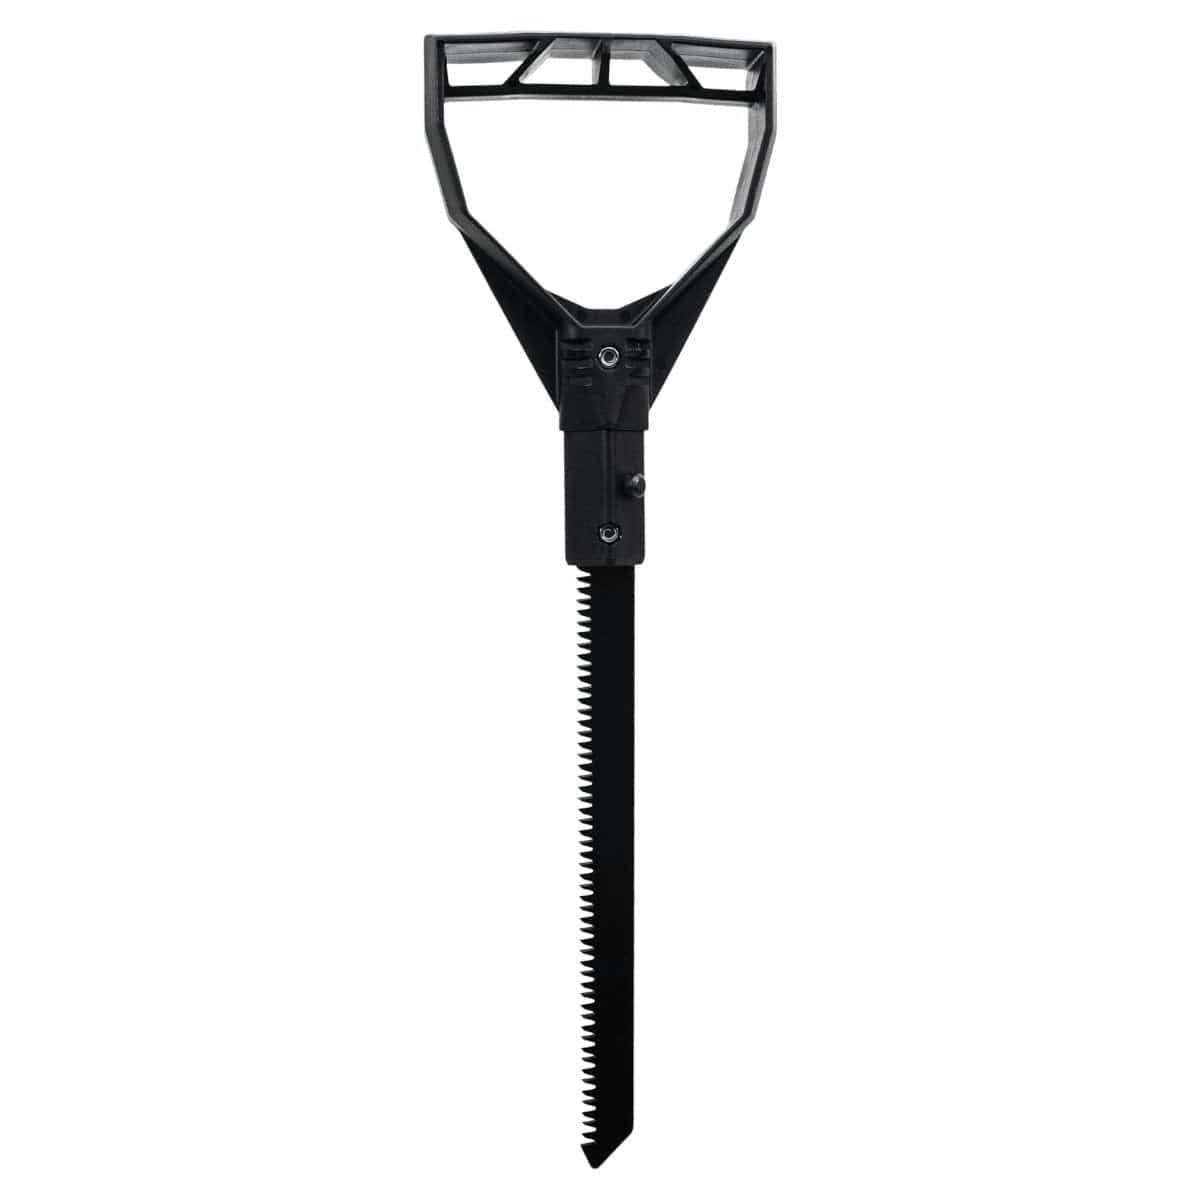 Saw & handle replacement for shovel - Factory Recreation